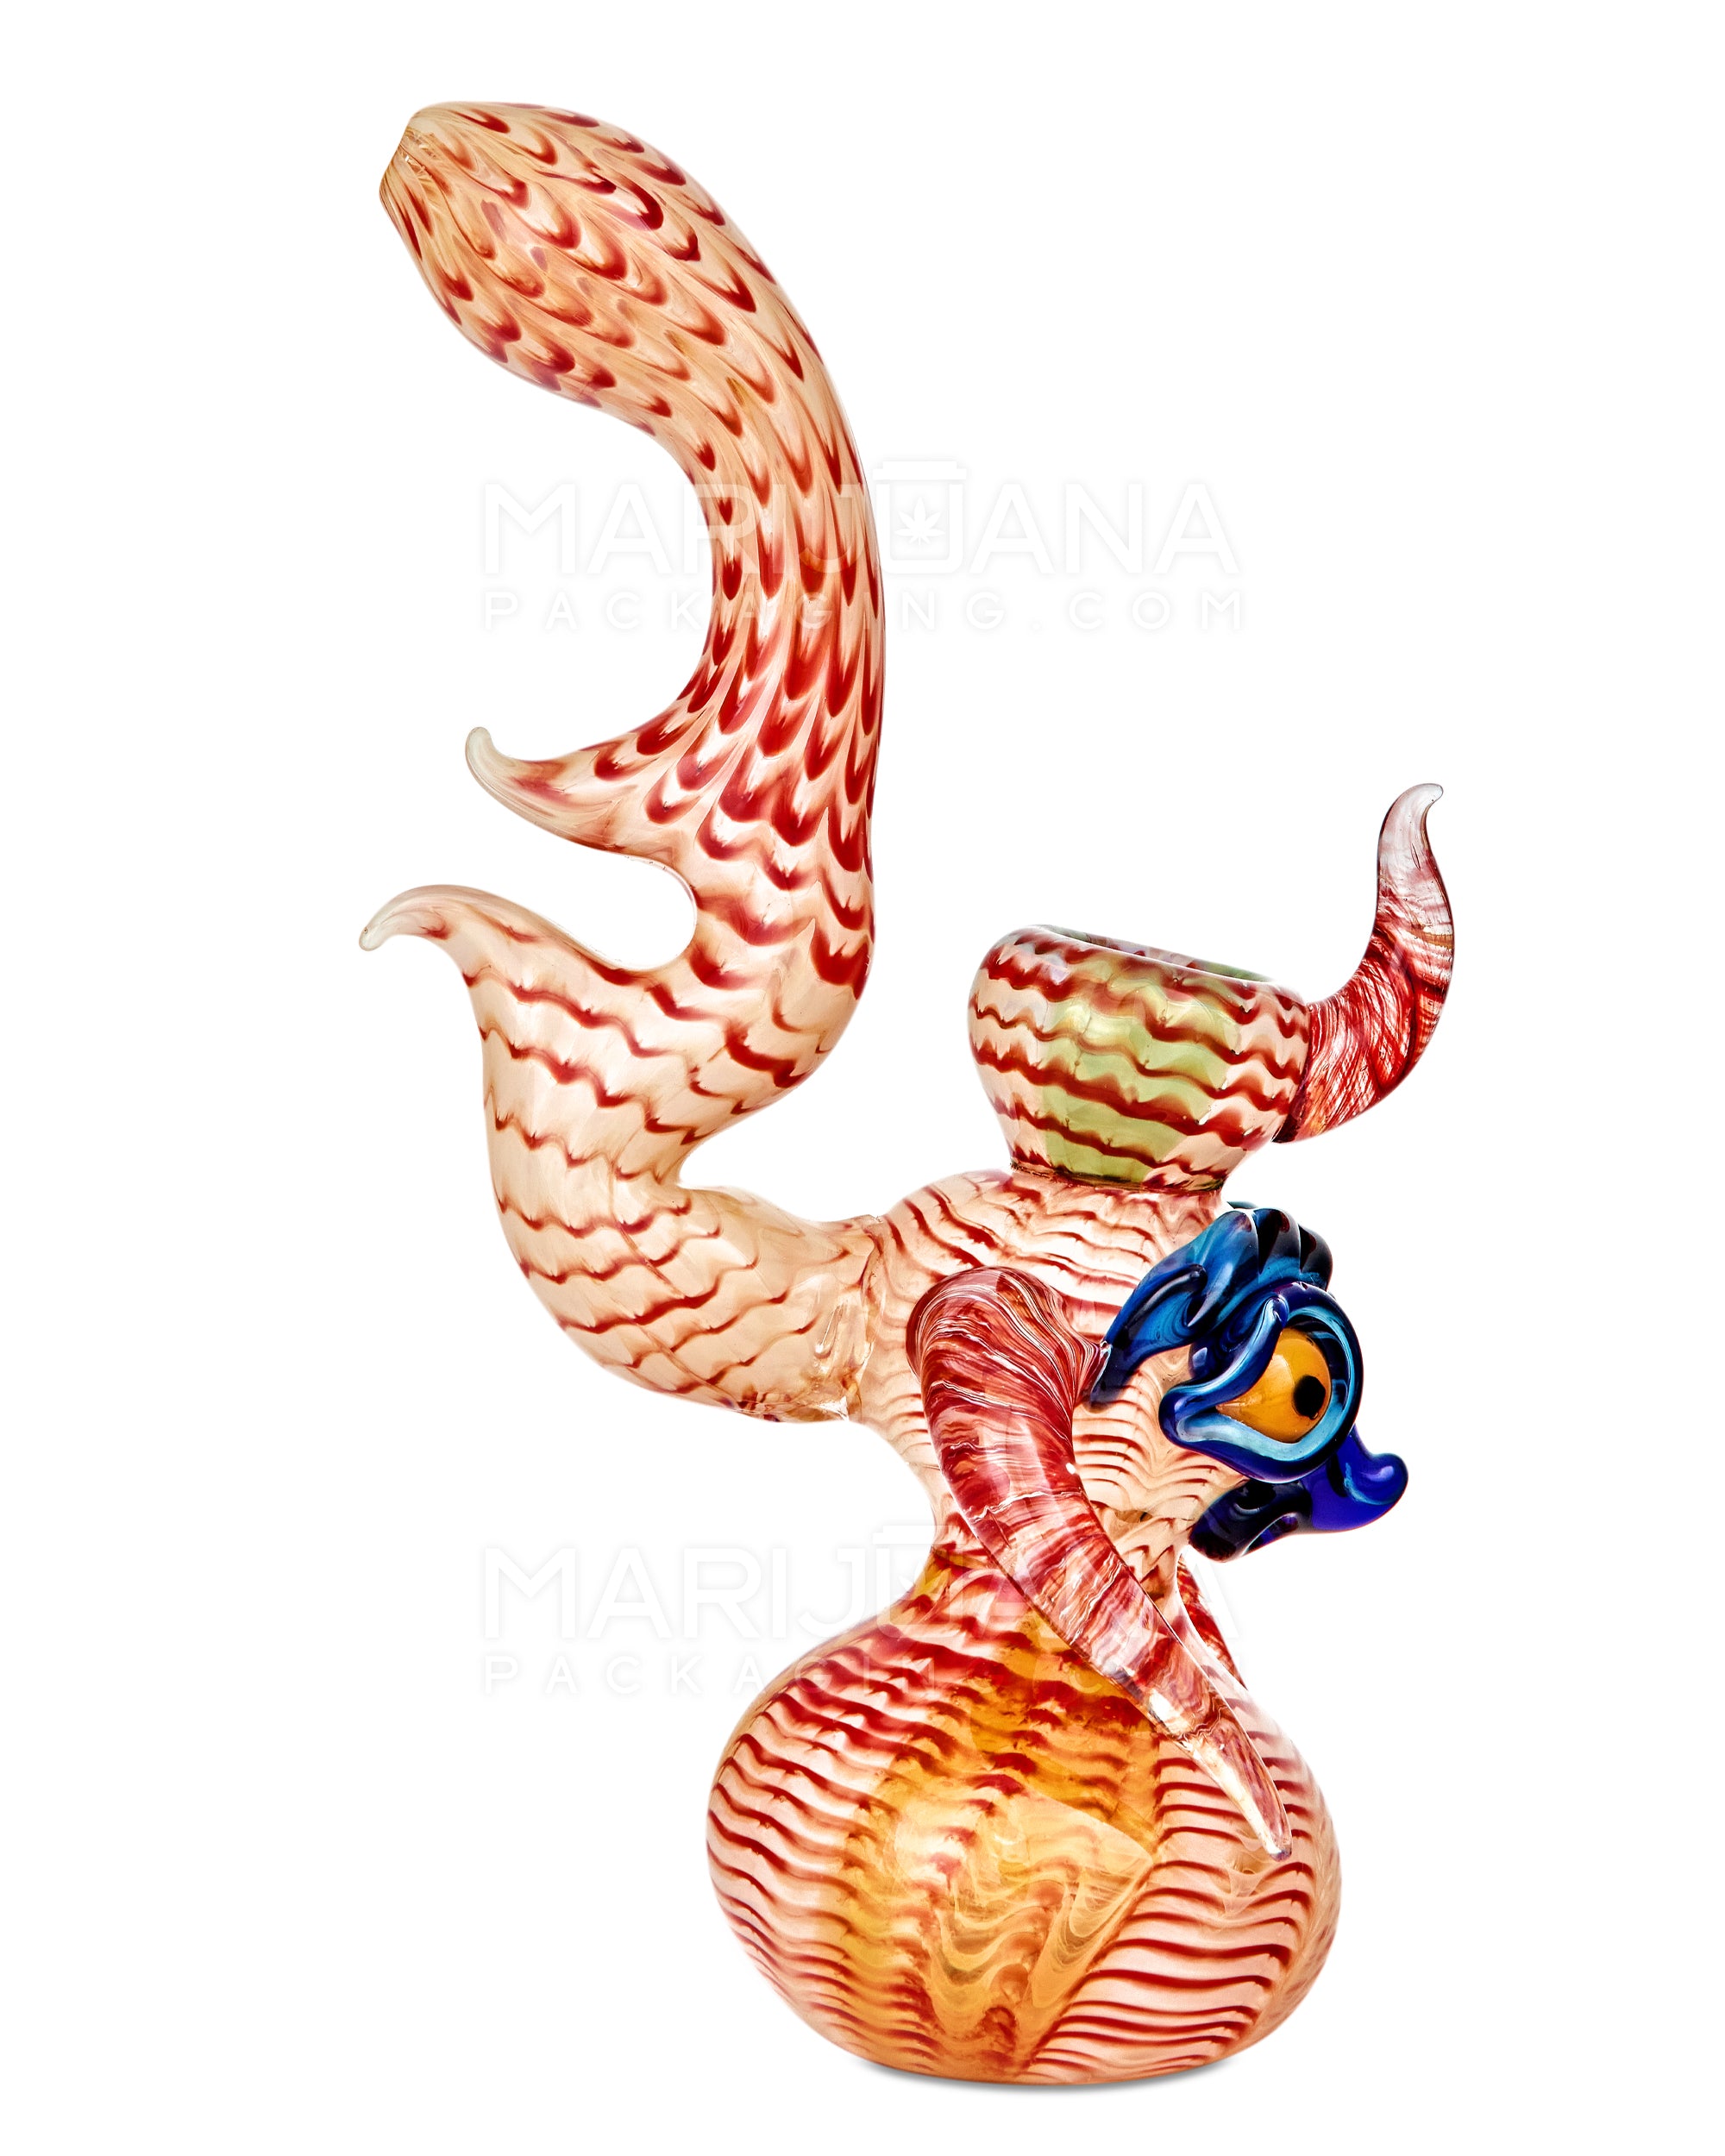 Heady | Crescent Moon Neck Raked & Gold Fumed Owl Face Bubbler w/ Triple Horns | 8.5in Tall - Thick Glass - Assorted - 5